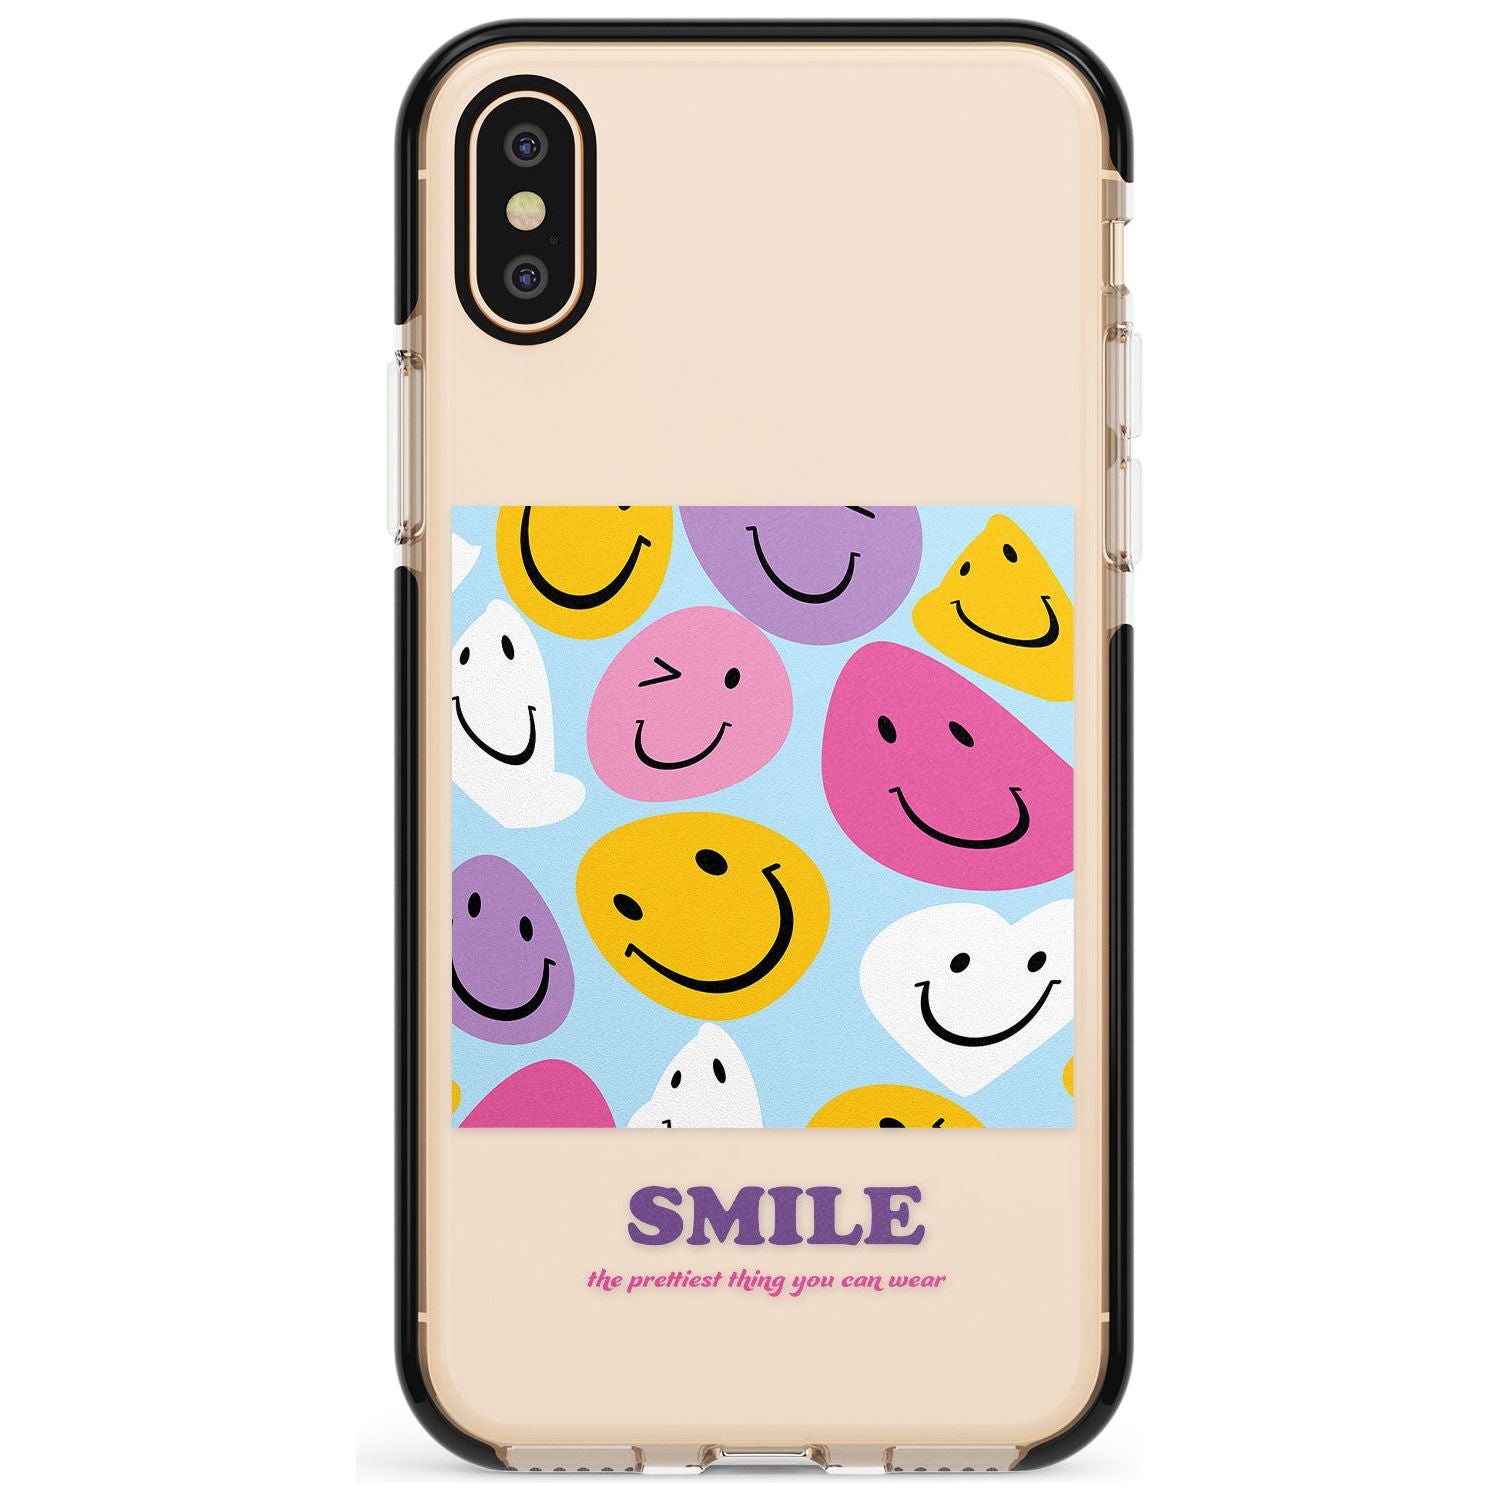 A Smile Black Impact Phone Case for iPhone X XS Max XR